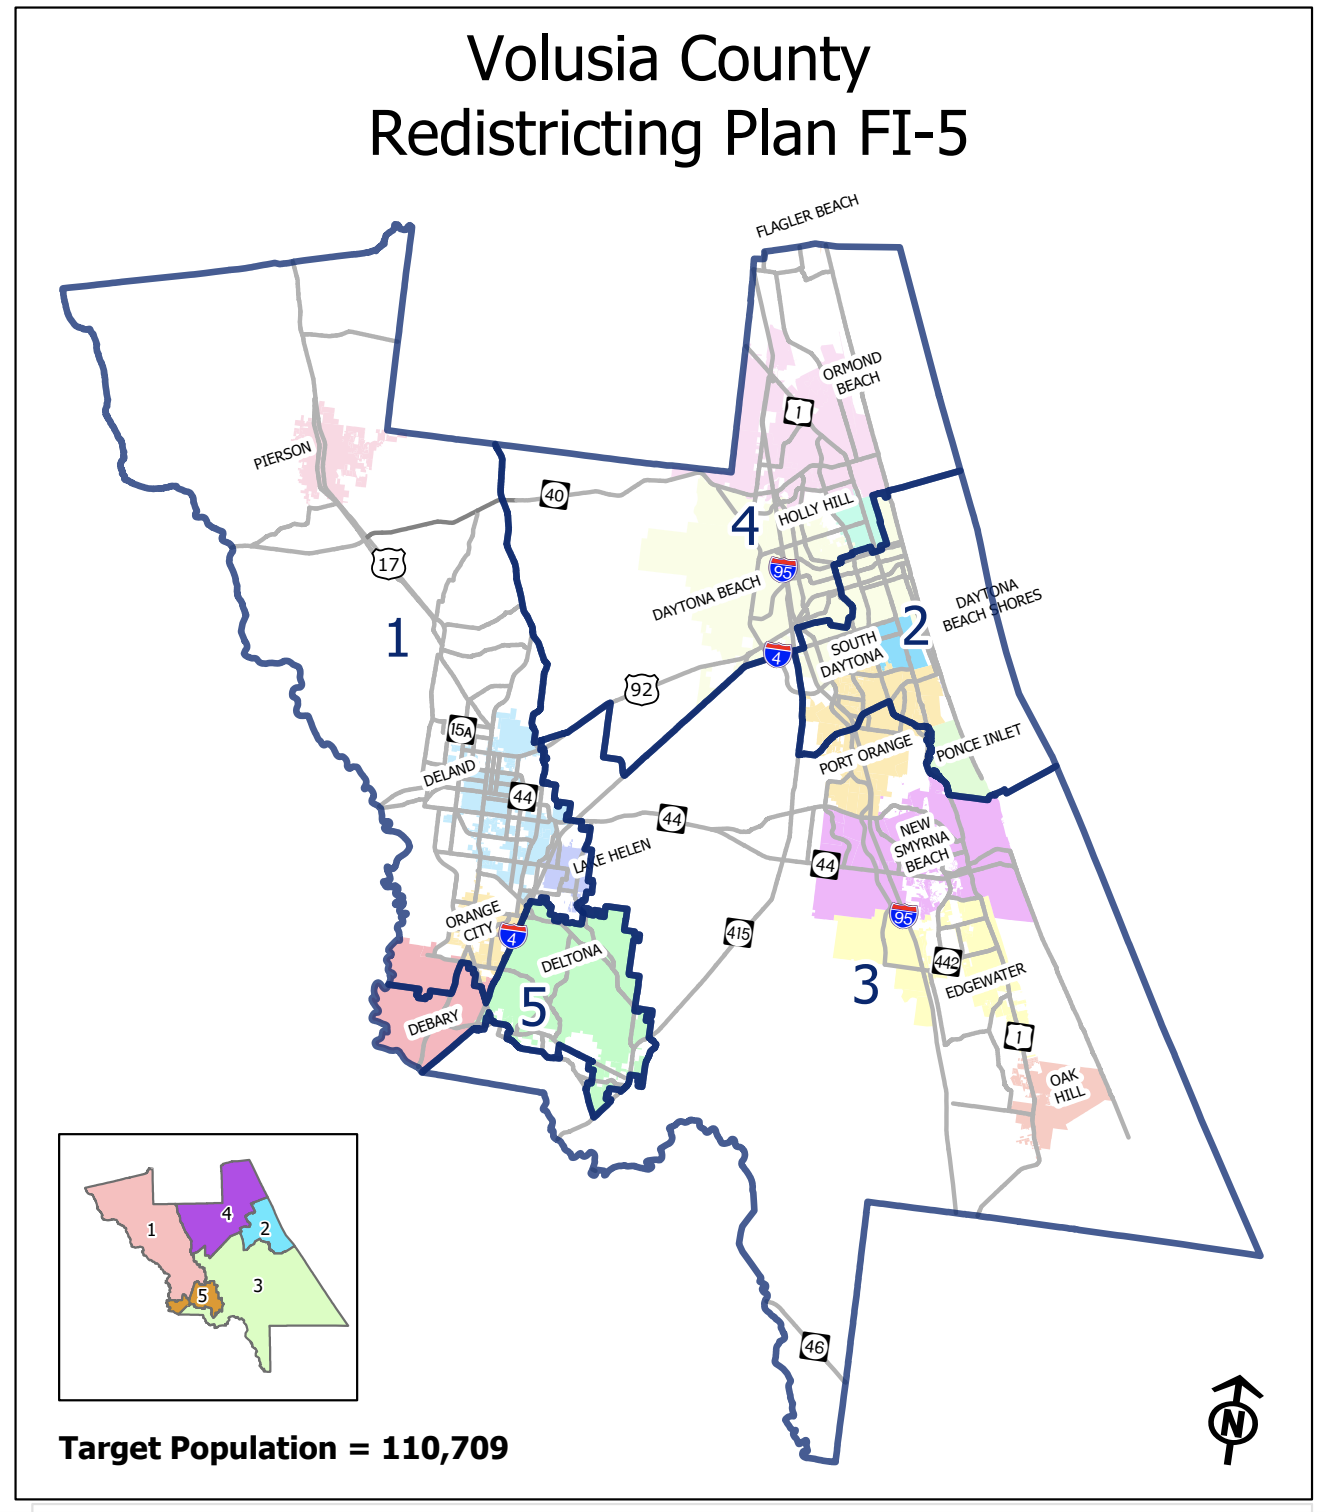 Redistricting Plan FI-5. Courtesy of Volusia County Government